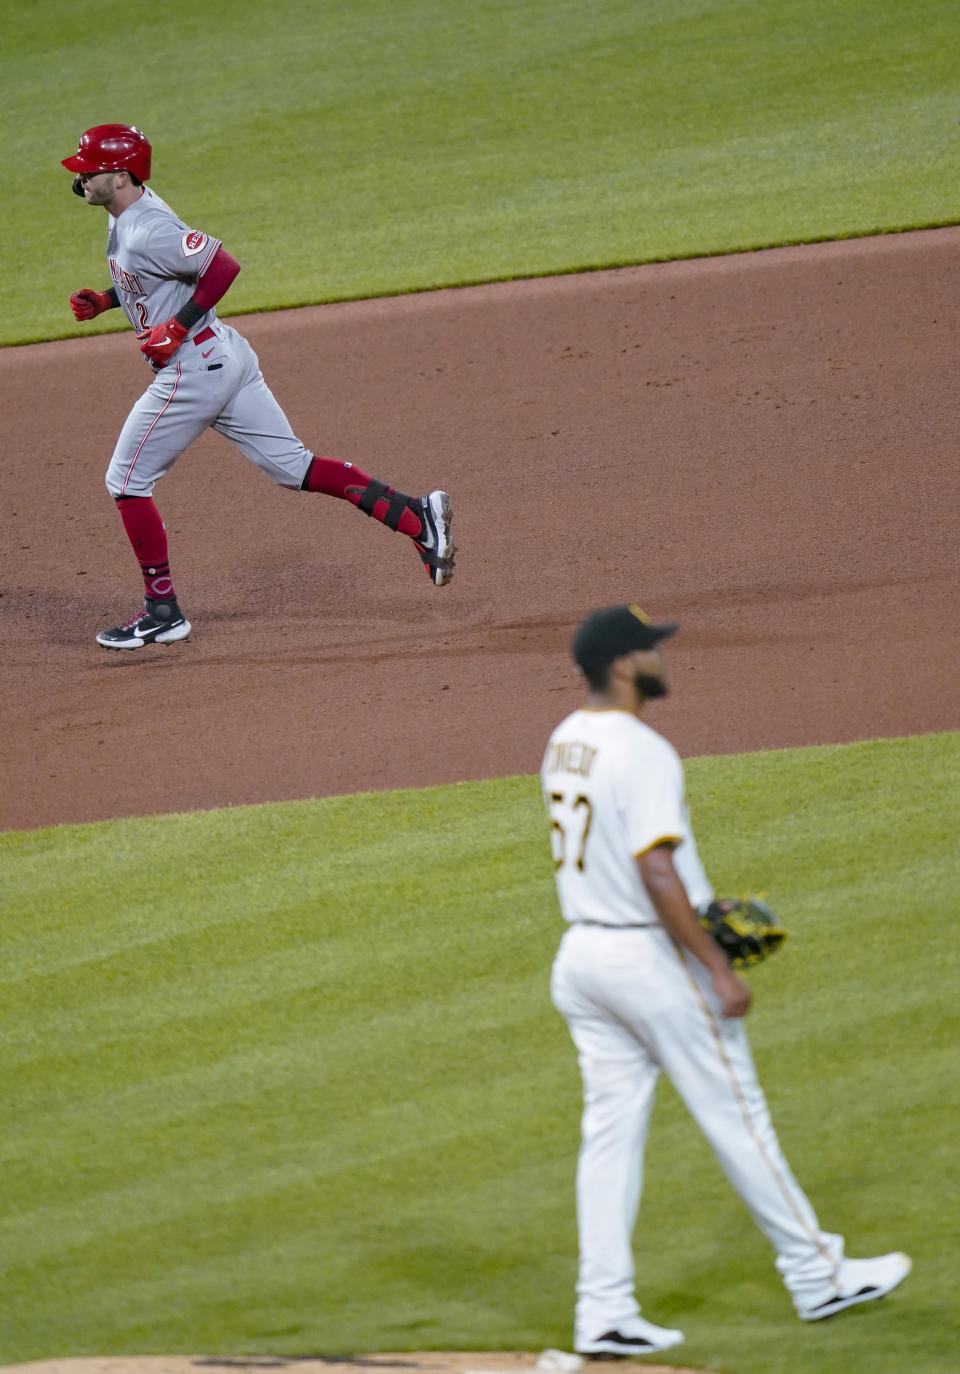 Cincinnati Reds' Tyler Naquin, left, rounds the bases after hitting a three-run home run off Pittsburgh Pirates starting pitcher Luis Oviedo, right, in the seventh inning of a baseball game, Monday, May 10, 2021, in Pittsburgh. (AP Photo/Keith Srakocic)